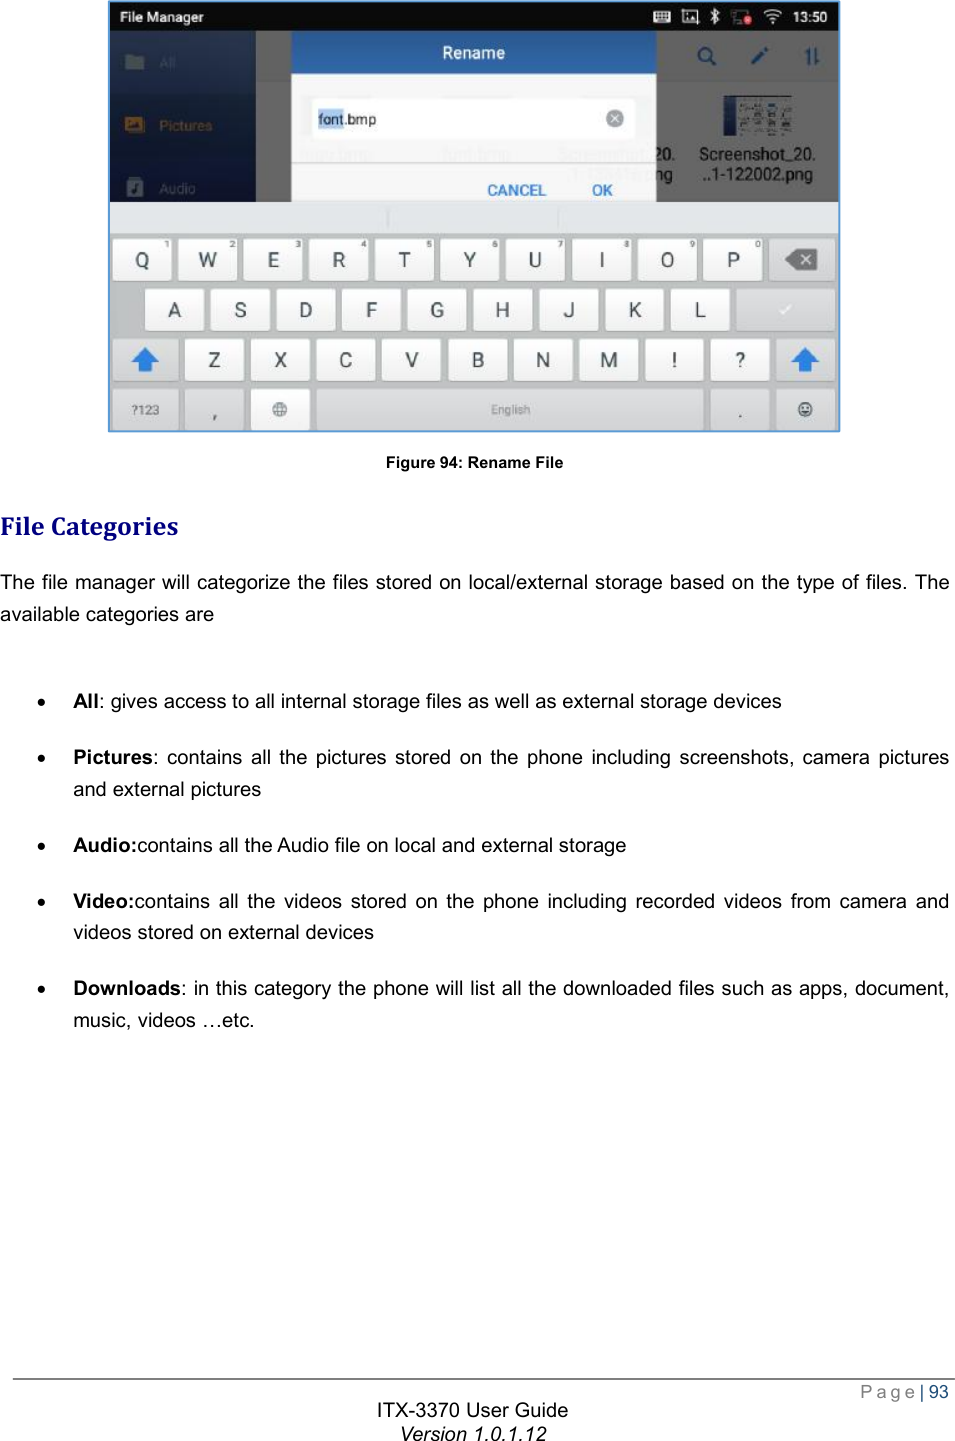  Page| 93  ITX-3370 User Guide Version 1.0.1.12   Figure 94: Rename File File Categories The file manager will categorize the files stored on local/external storage based on the type of files. The available categories are   · All: gives access to all internal storage files as well as external storage devices  · Pictures: contains all the pictures stored on the phone including screenshots, camera pictures and external pictures · Audio:contains all the Audio file on local and external storage · Video:contains all the videos stored on the phone including recorded videos from camera and videos stored on external devices · Downloads: in this category the phone will list all the downloaded files such as apps, document, music, videos …etc. 